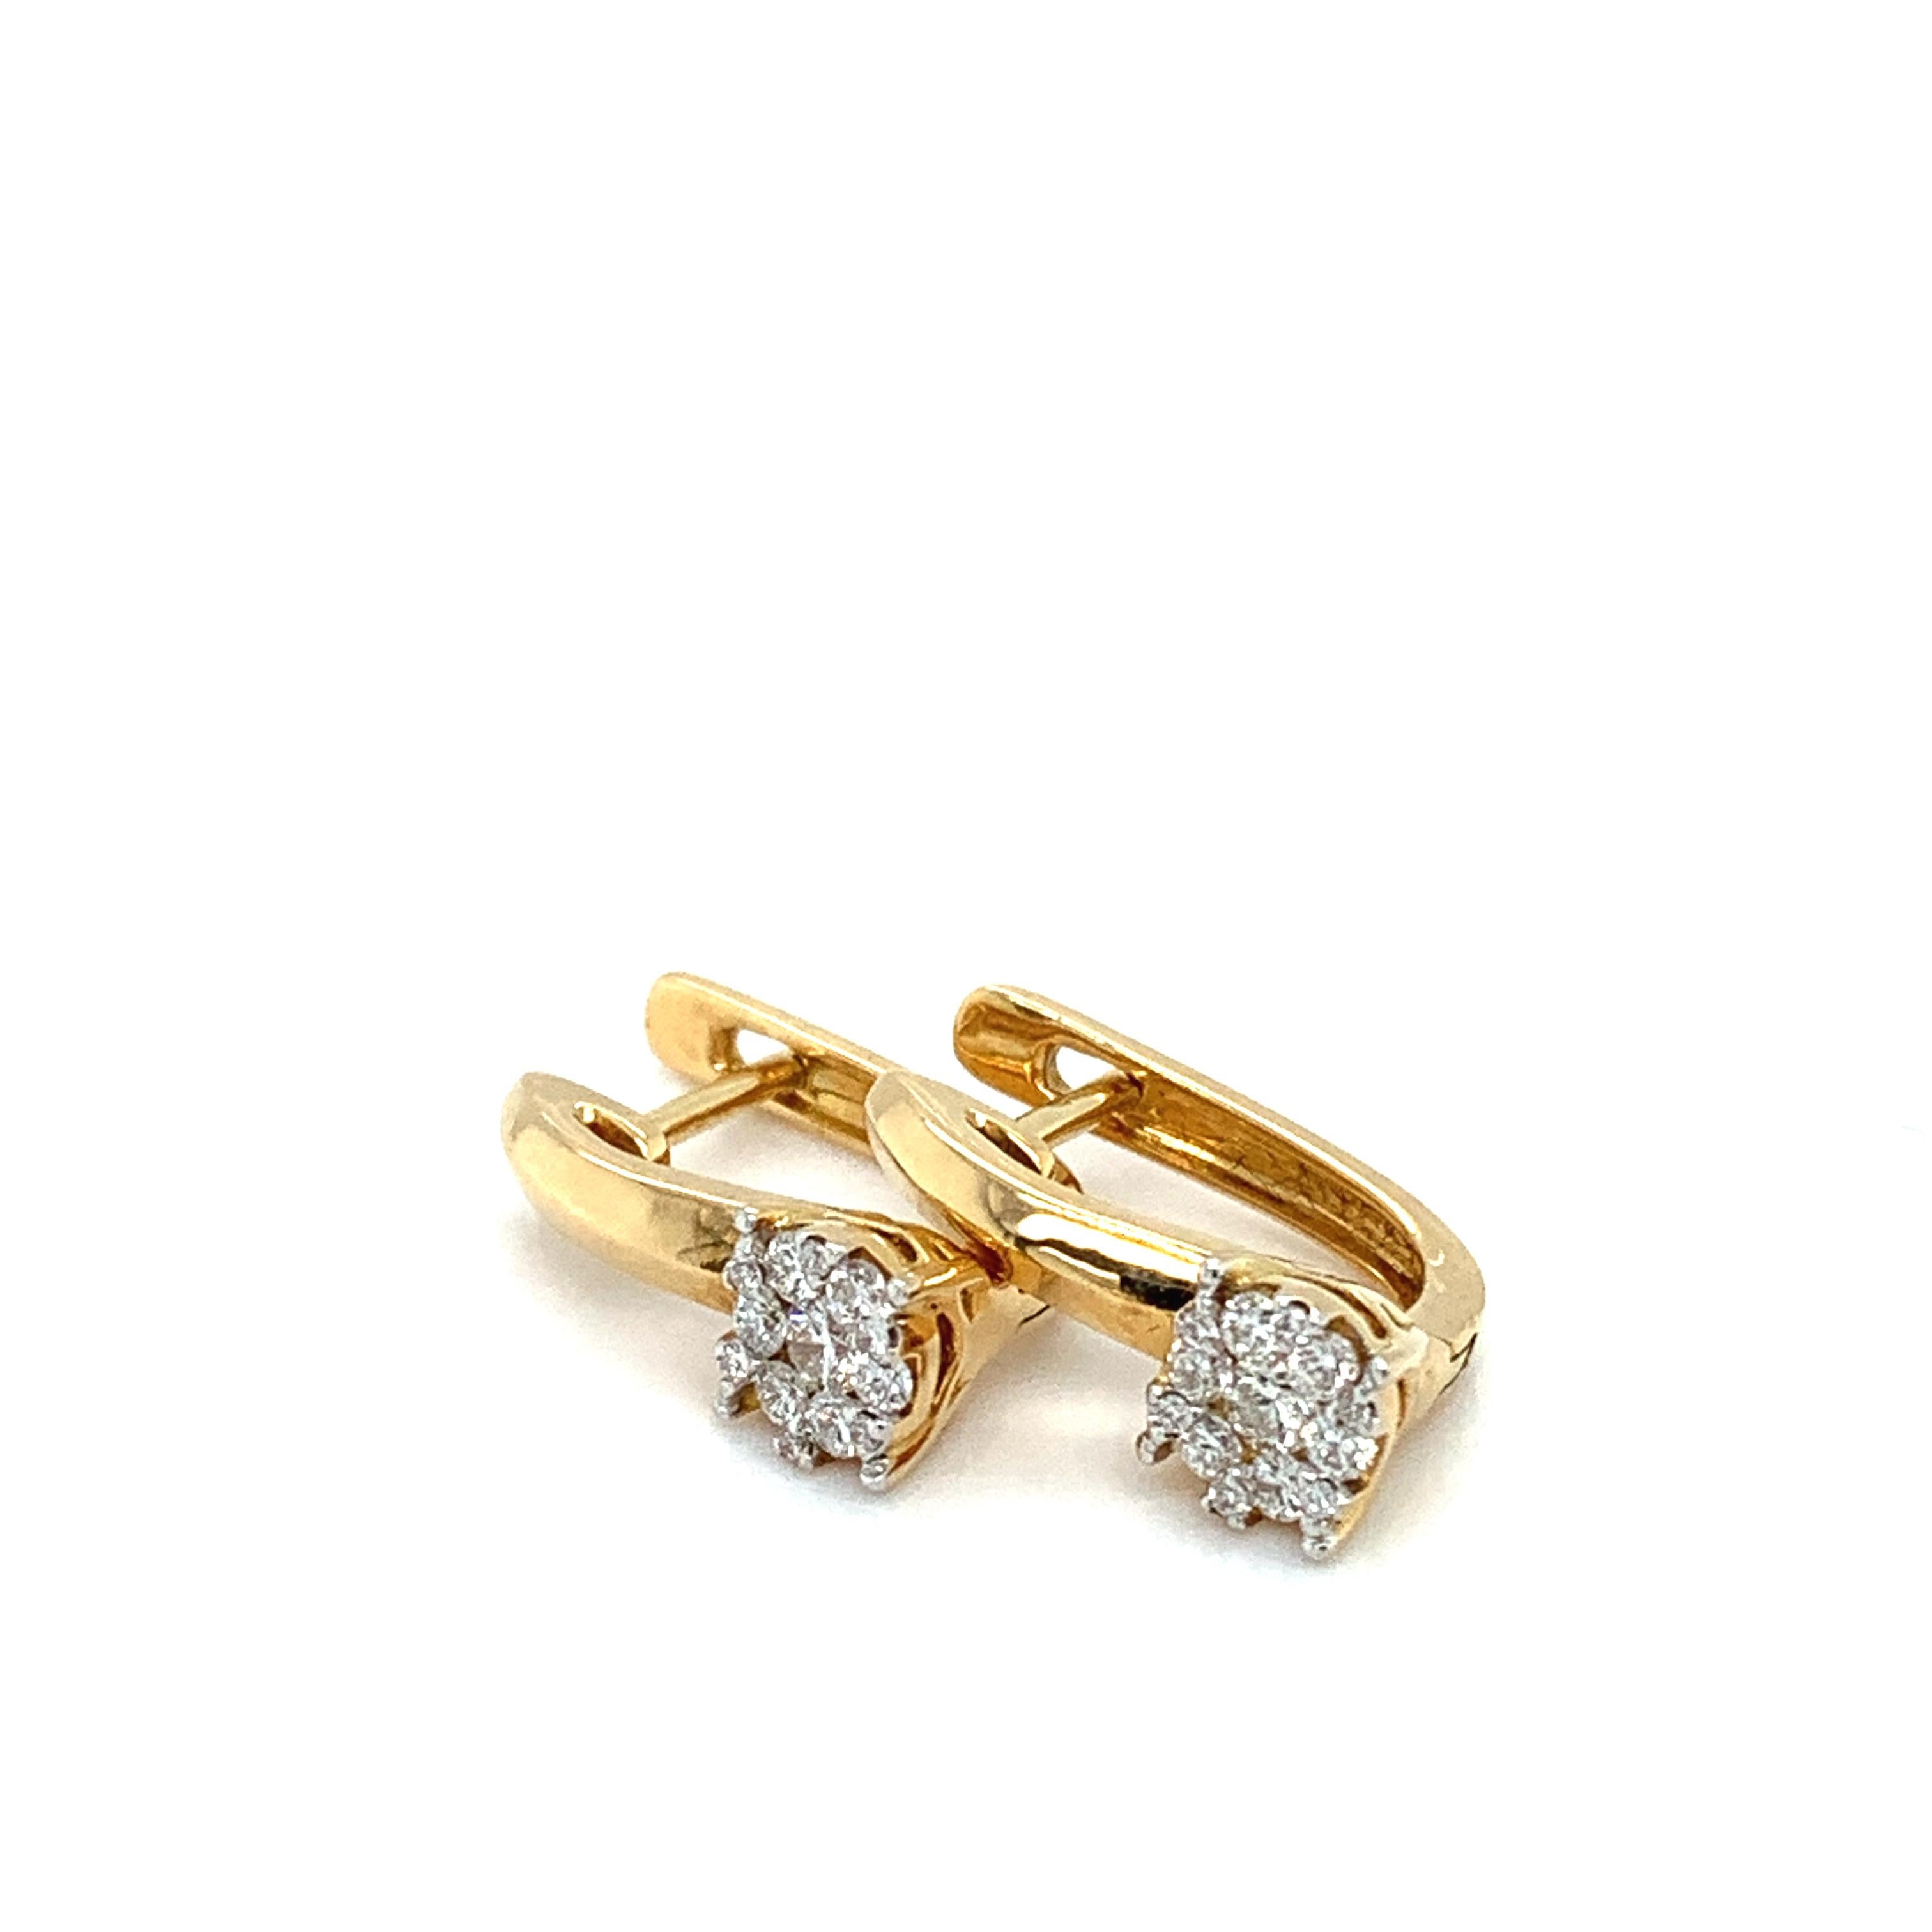 0.62ct Diamonds leverback earrings in 18k yellow gold
Round brilliant cut diamonds illusion solitaire setting leverback earrings in 18k yellow gold.
Diamonds total weight 0.62ct F in colour VS1 in clarity
Weight 3.6g
High polish, hallmarked
Length